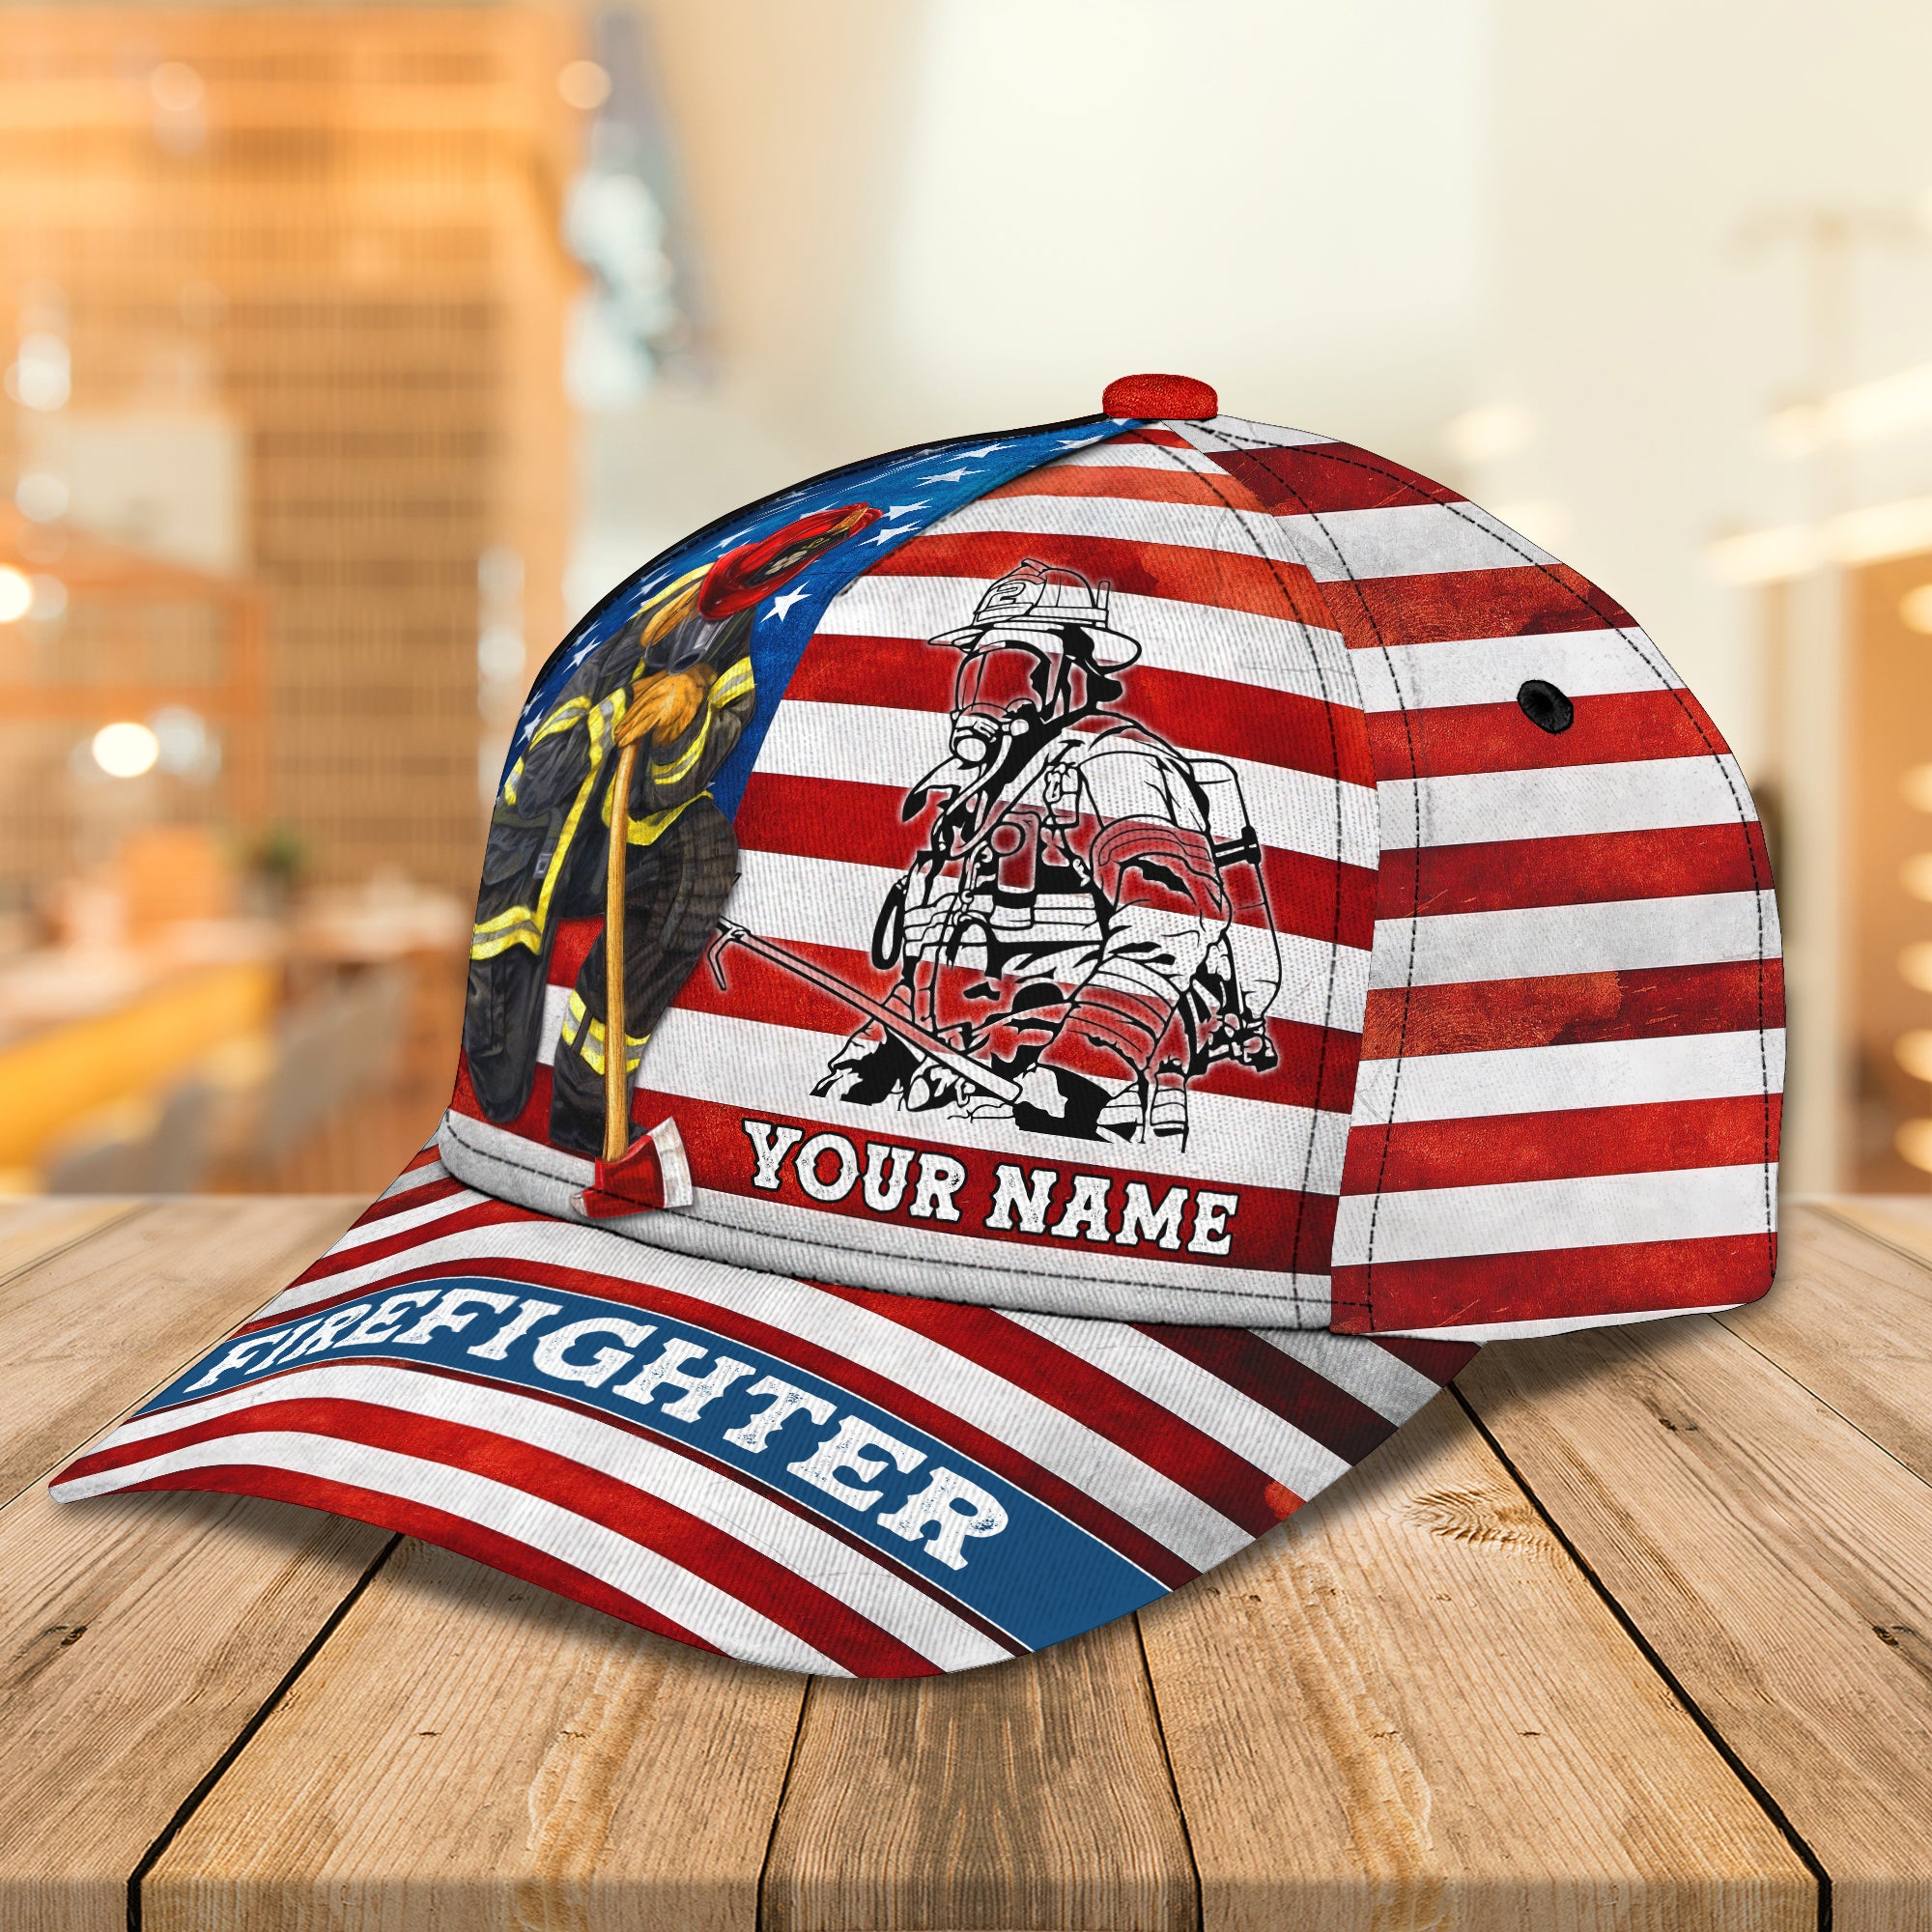 Firefighter - Personalized Name Cap - tra96